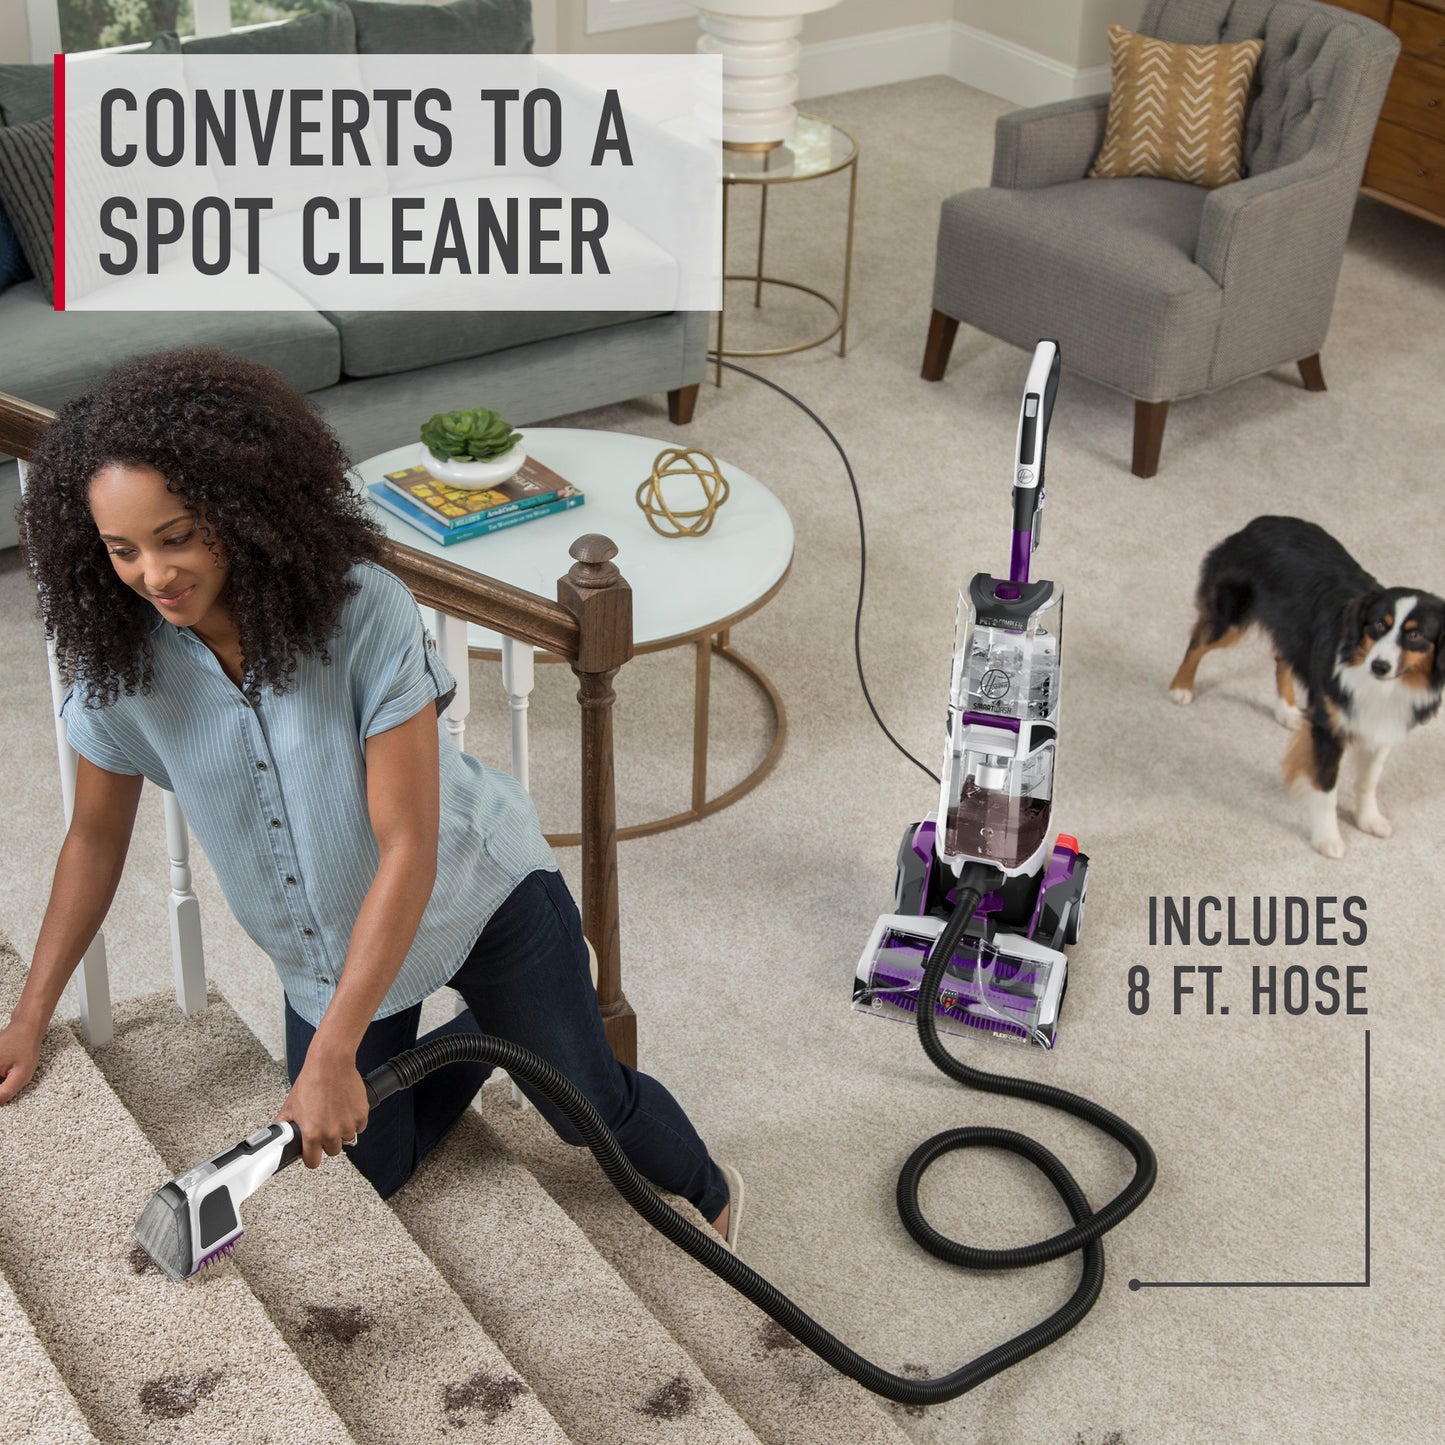 Hoover smartwash pet complete automatic carpet cleaner converts to a spot cleaner with 8ft hose perfect for tackling pet messes